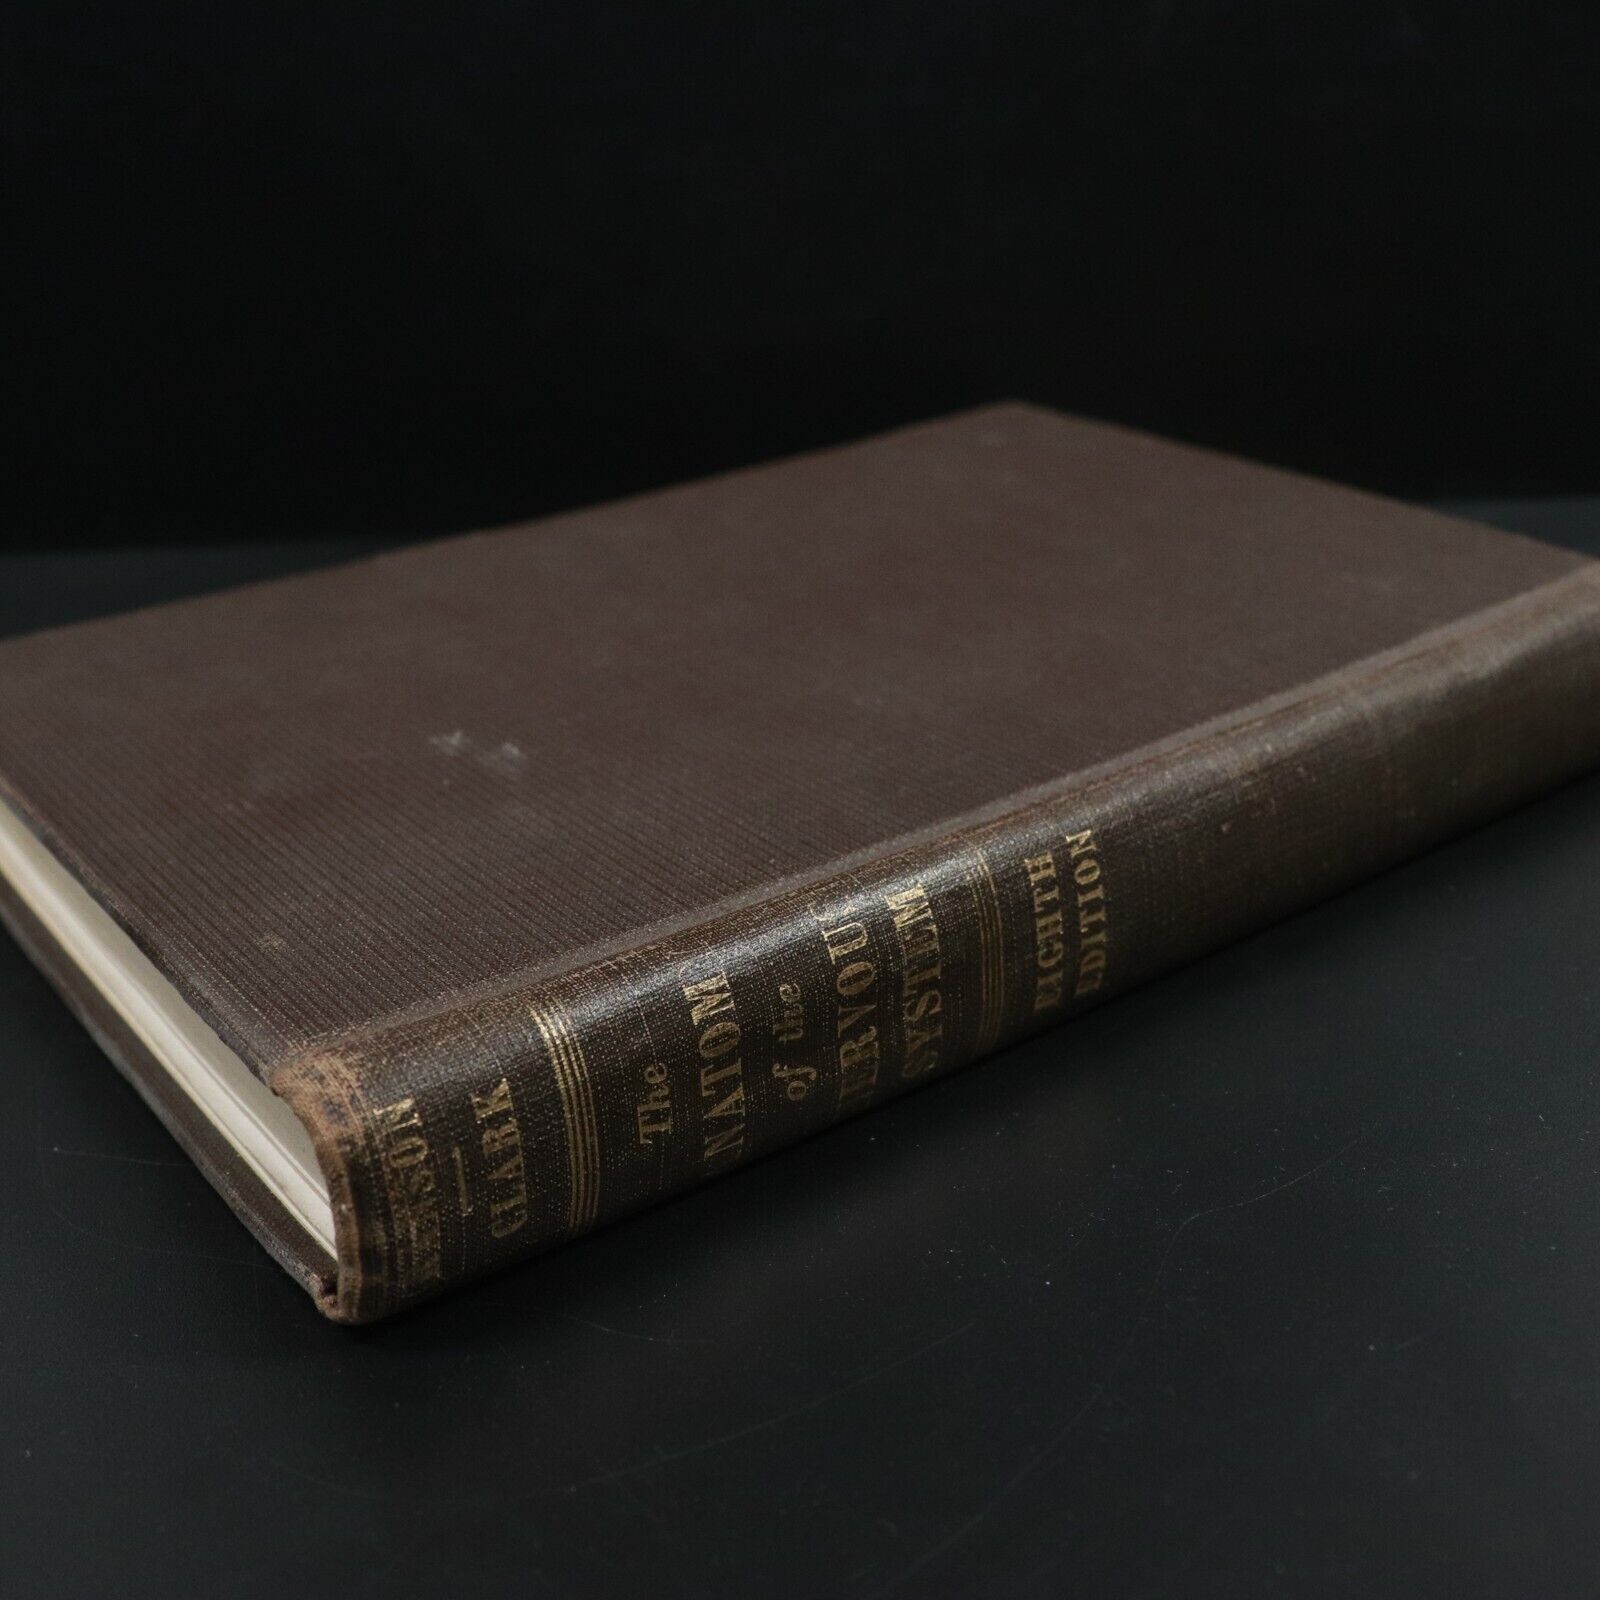 1947 Anatomy Of The Nervous System by S.W. Ranson Antique Medical Reference Book